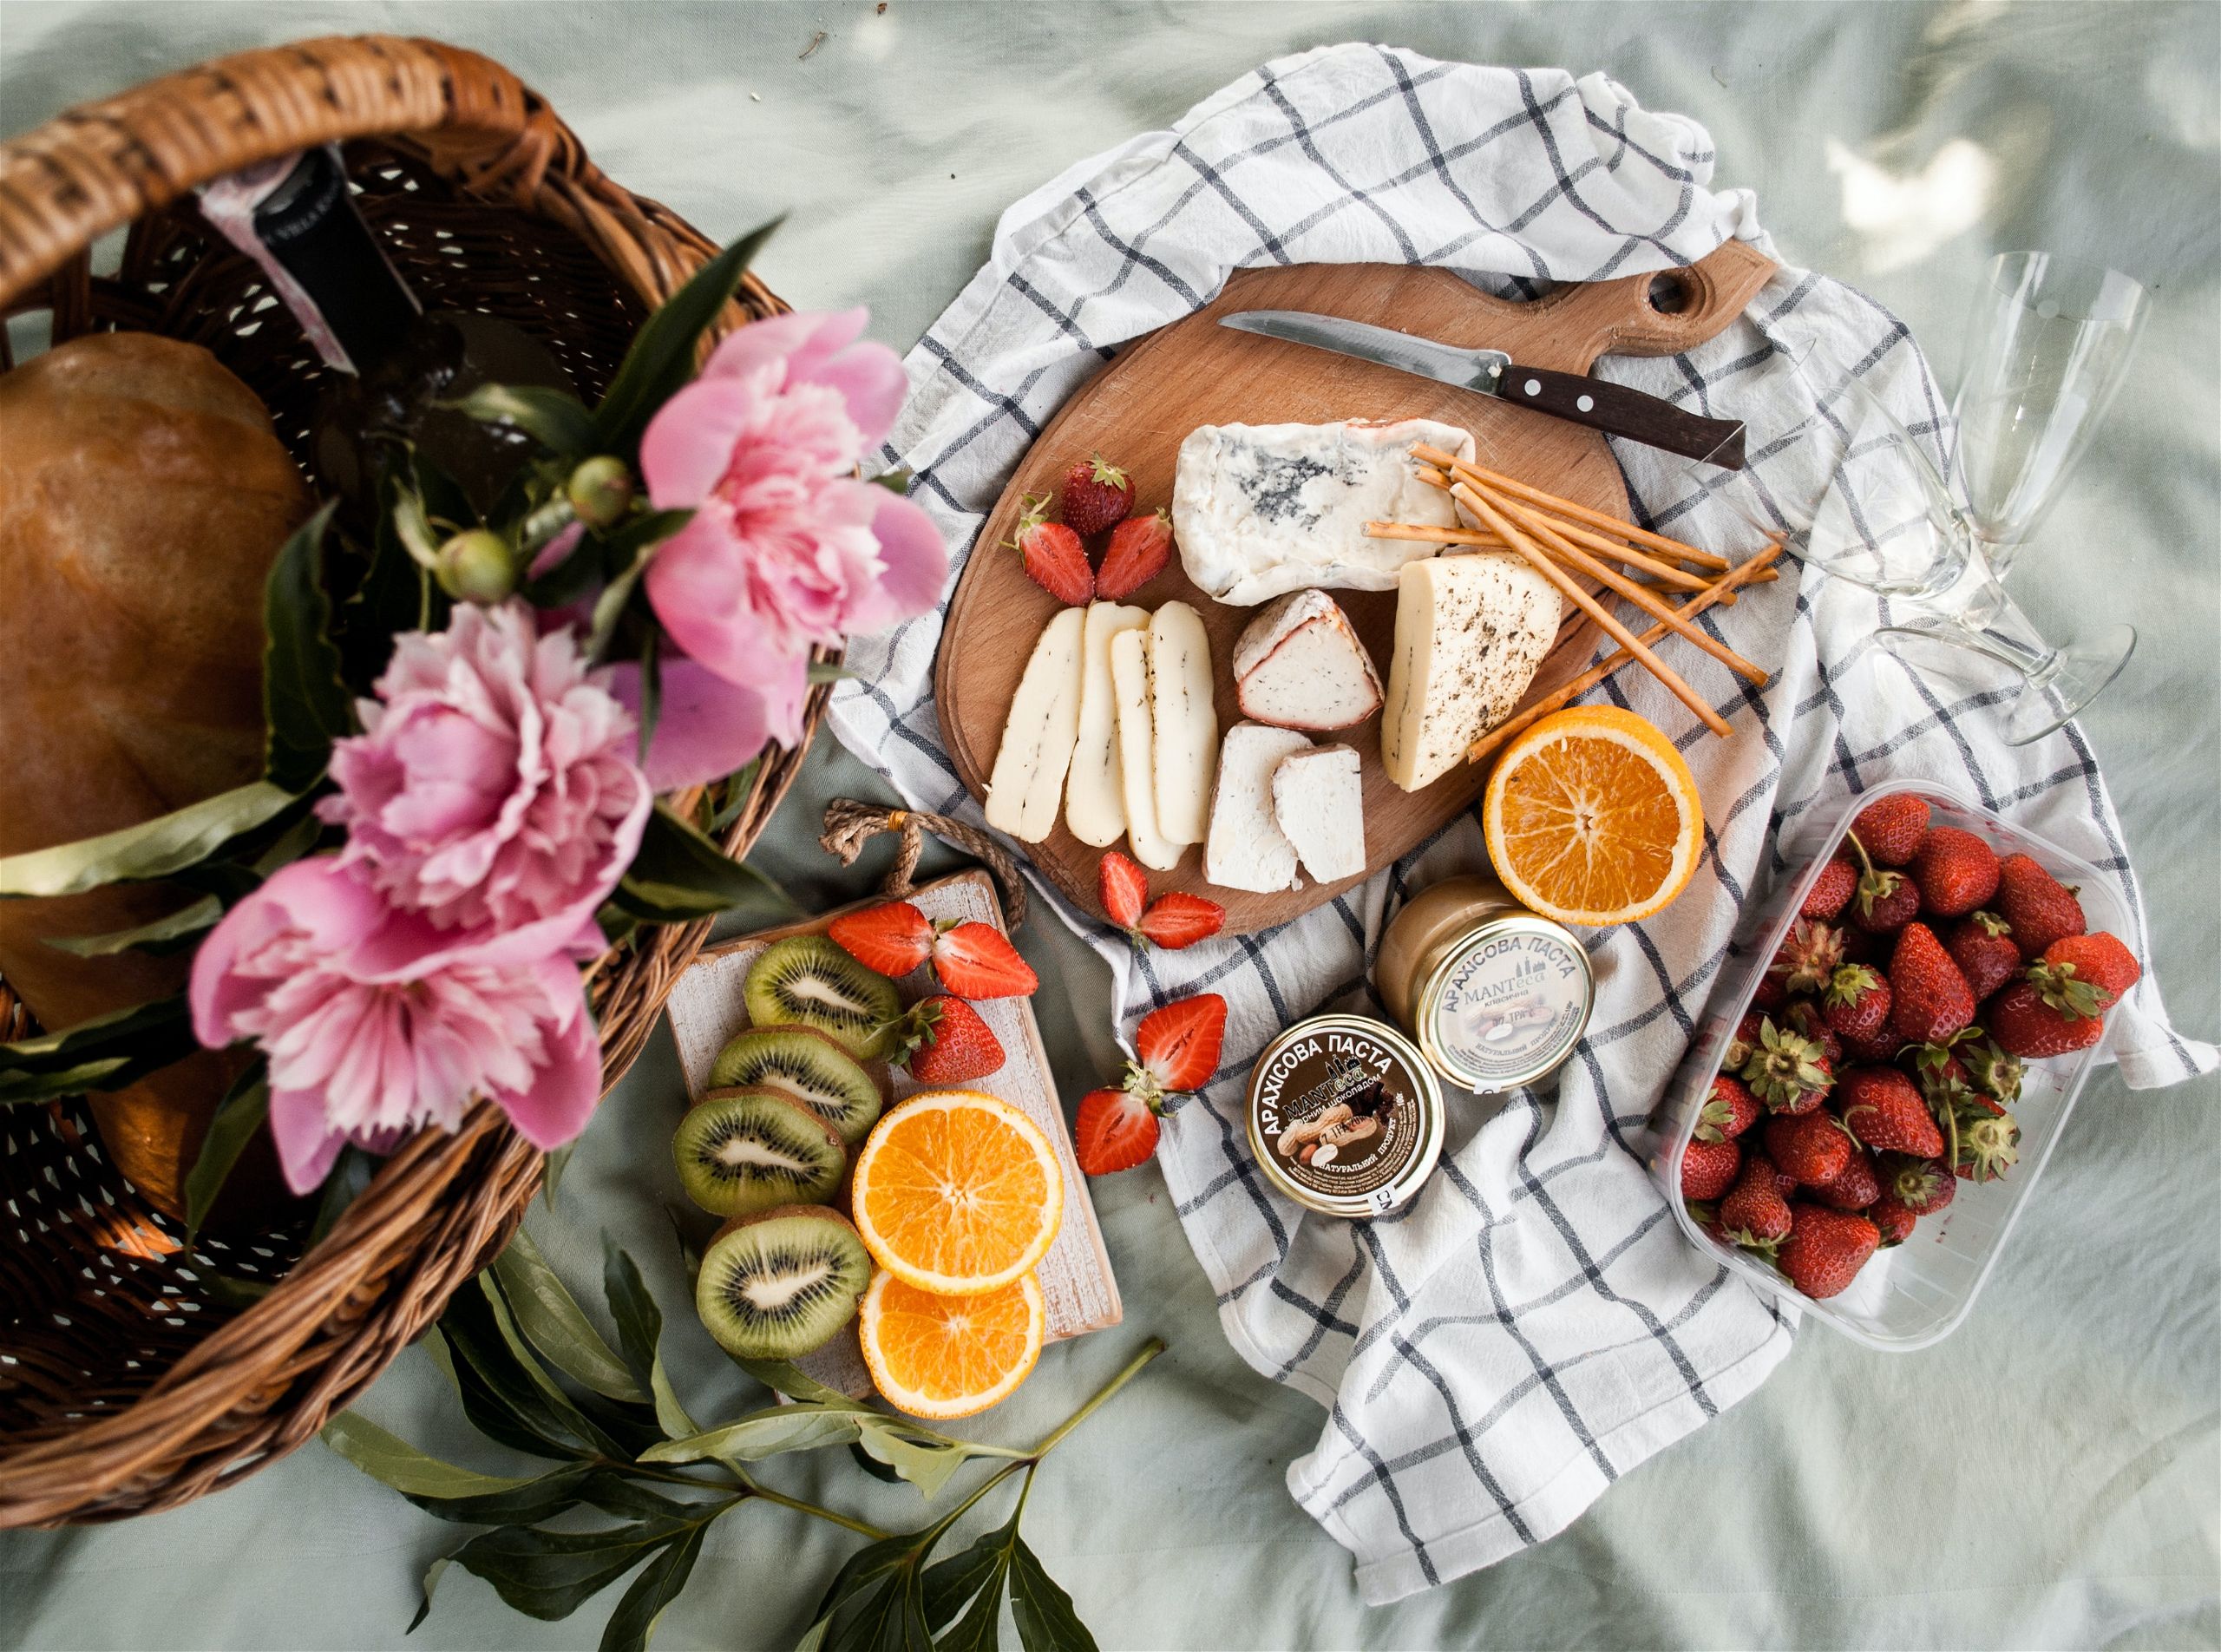 Perfect picnic ideas to enjoy this Summer